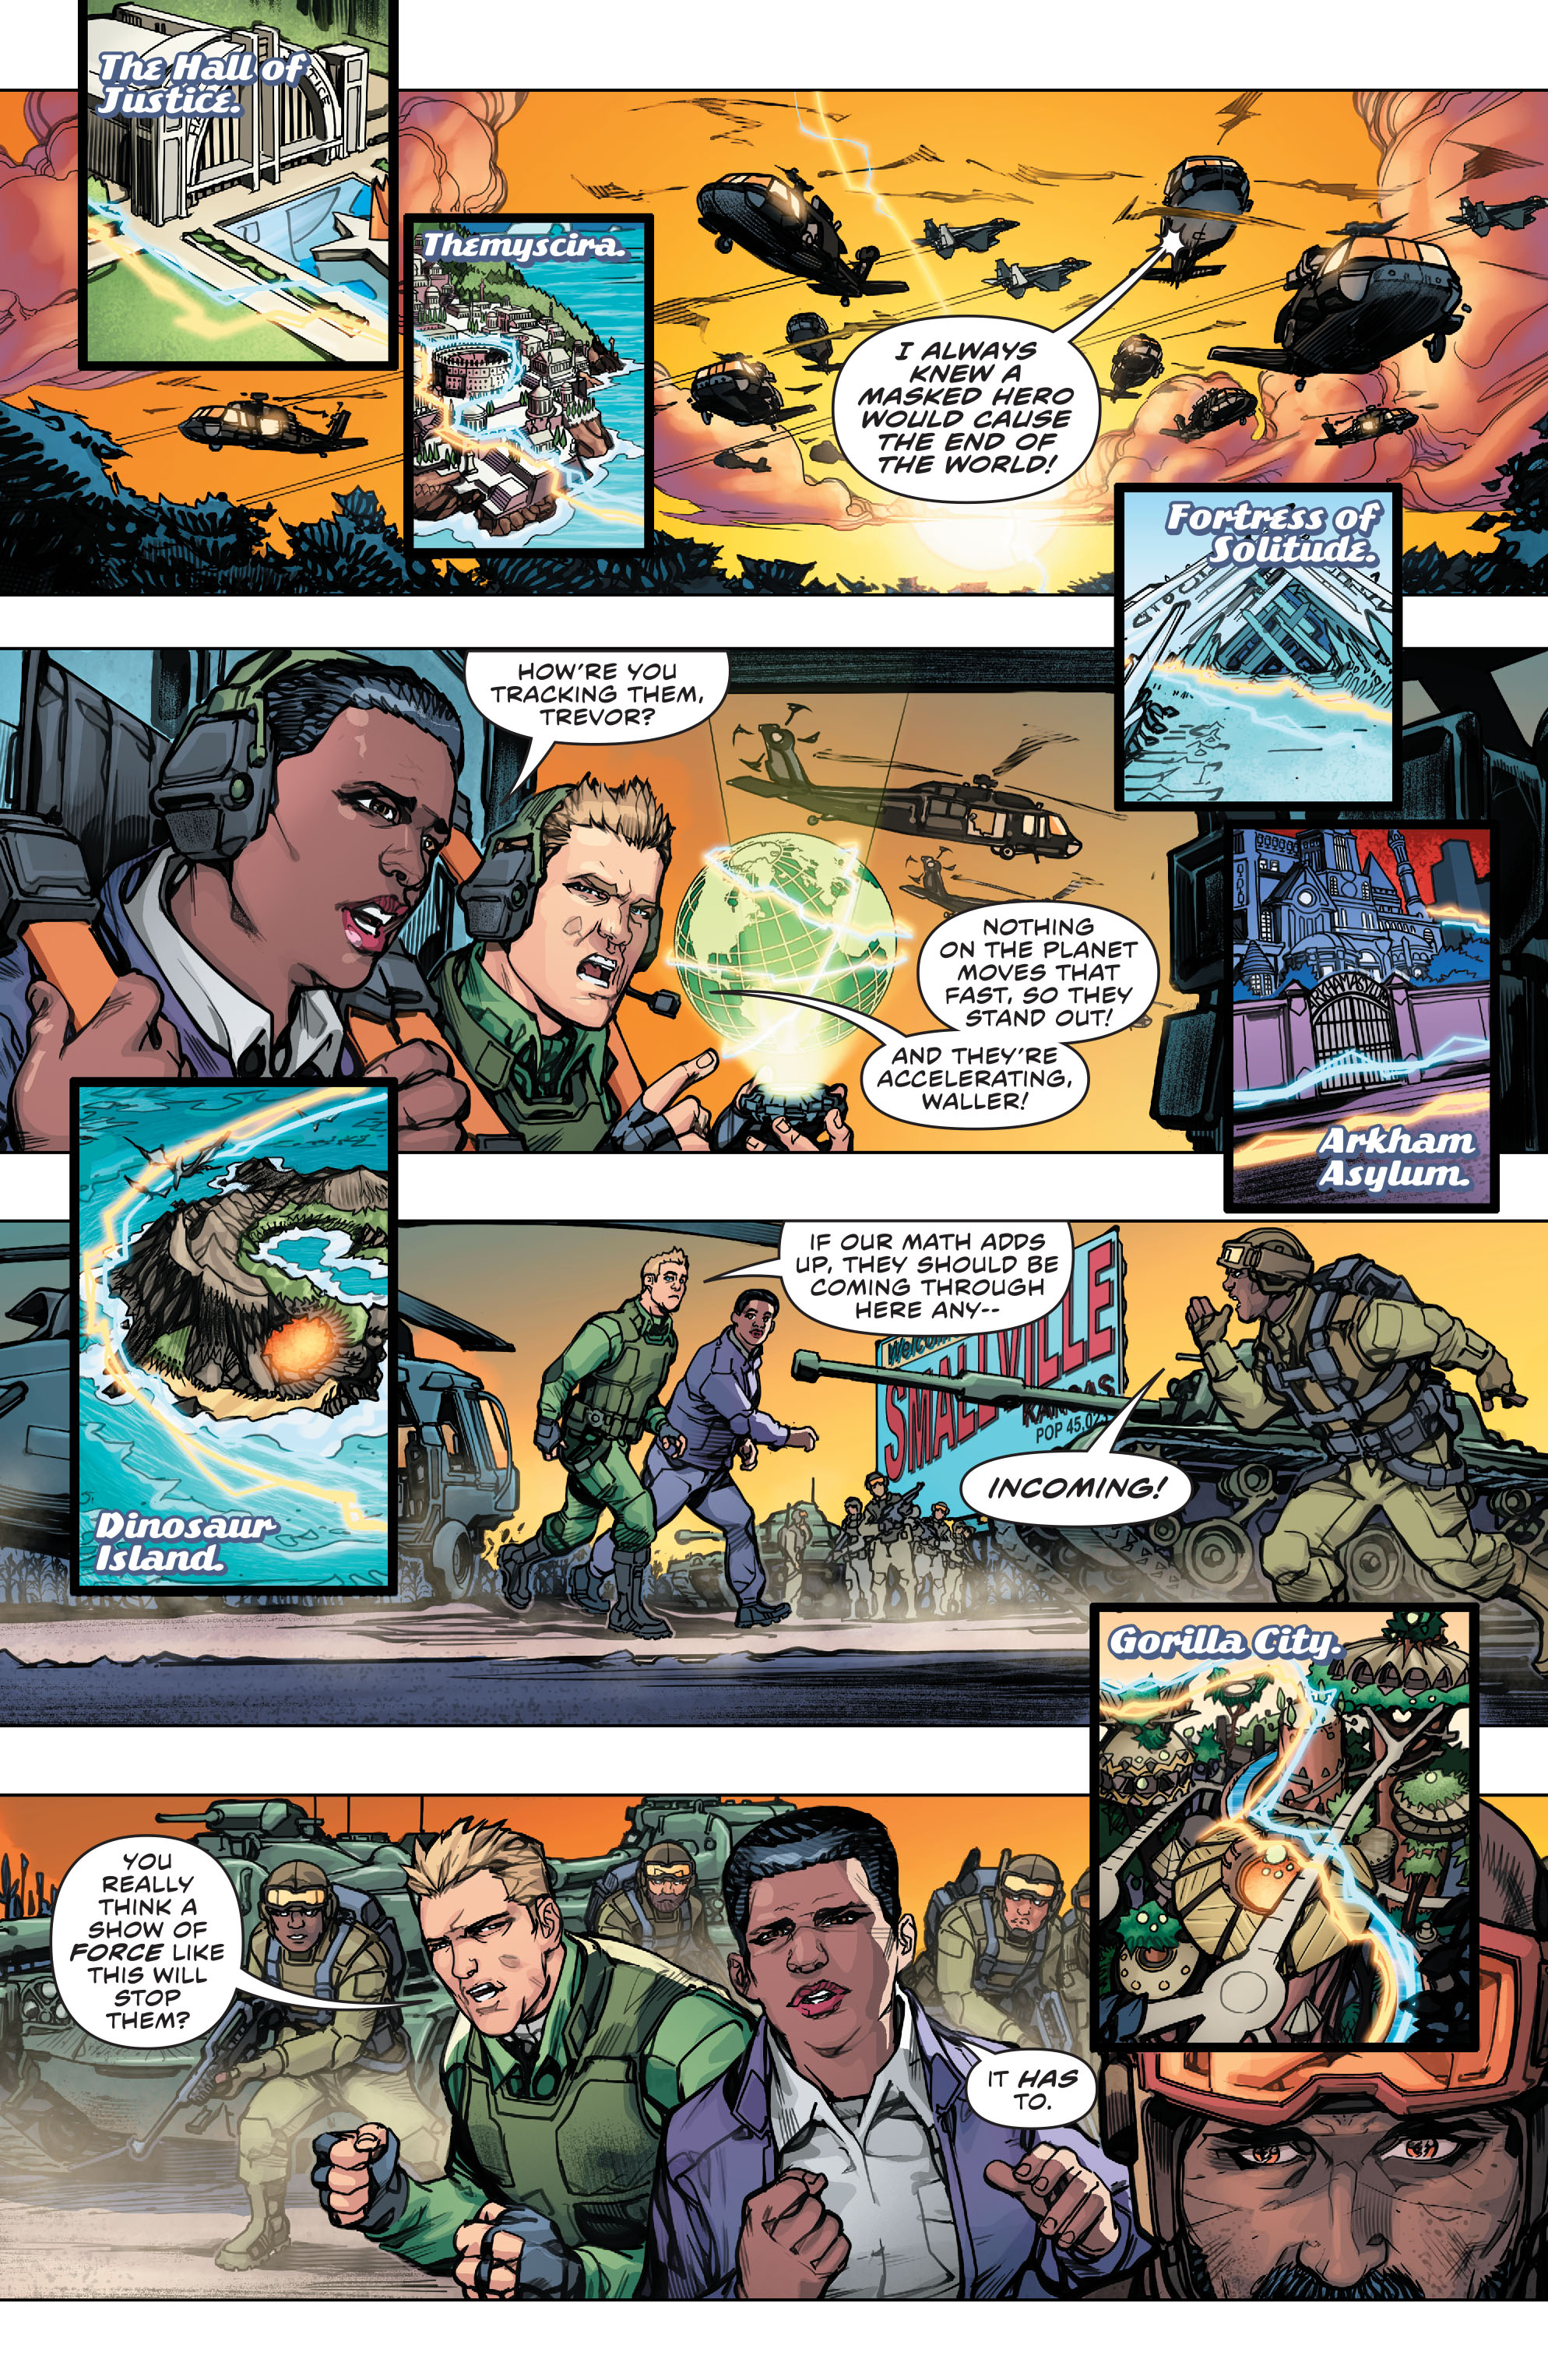 The Flash (2016-): Chapter 49 - Page 4